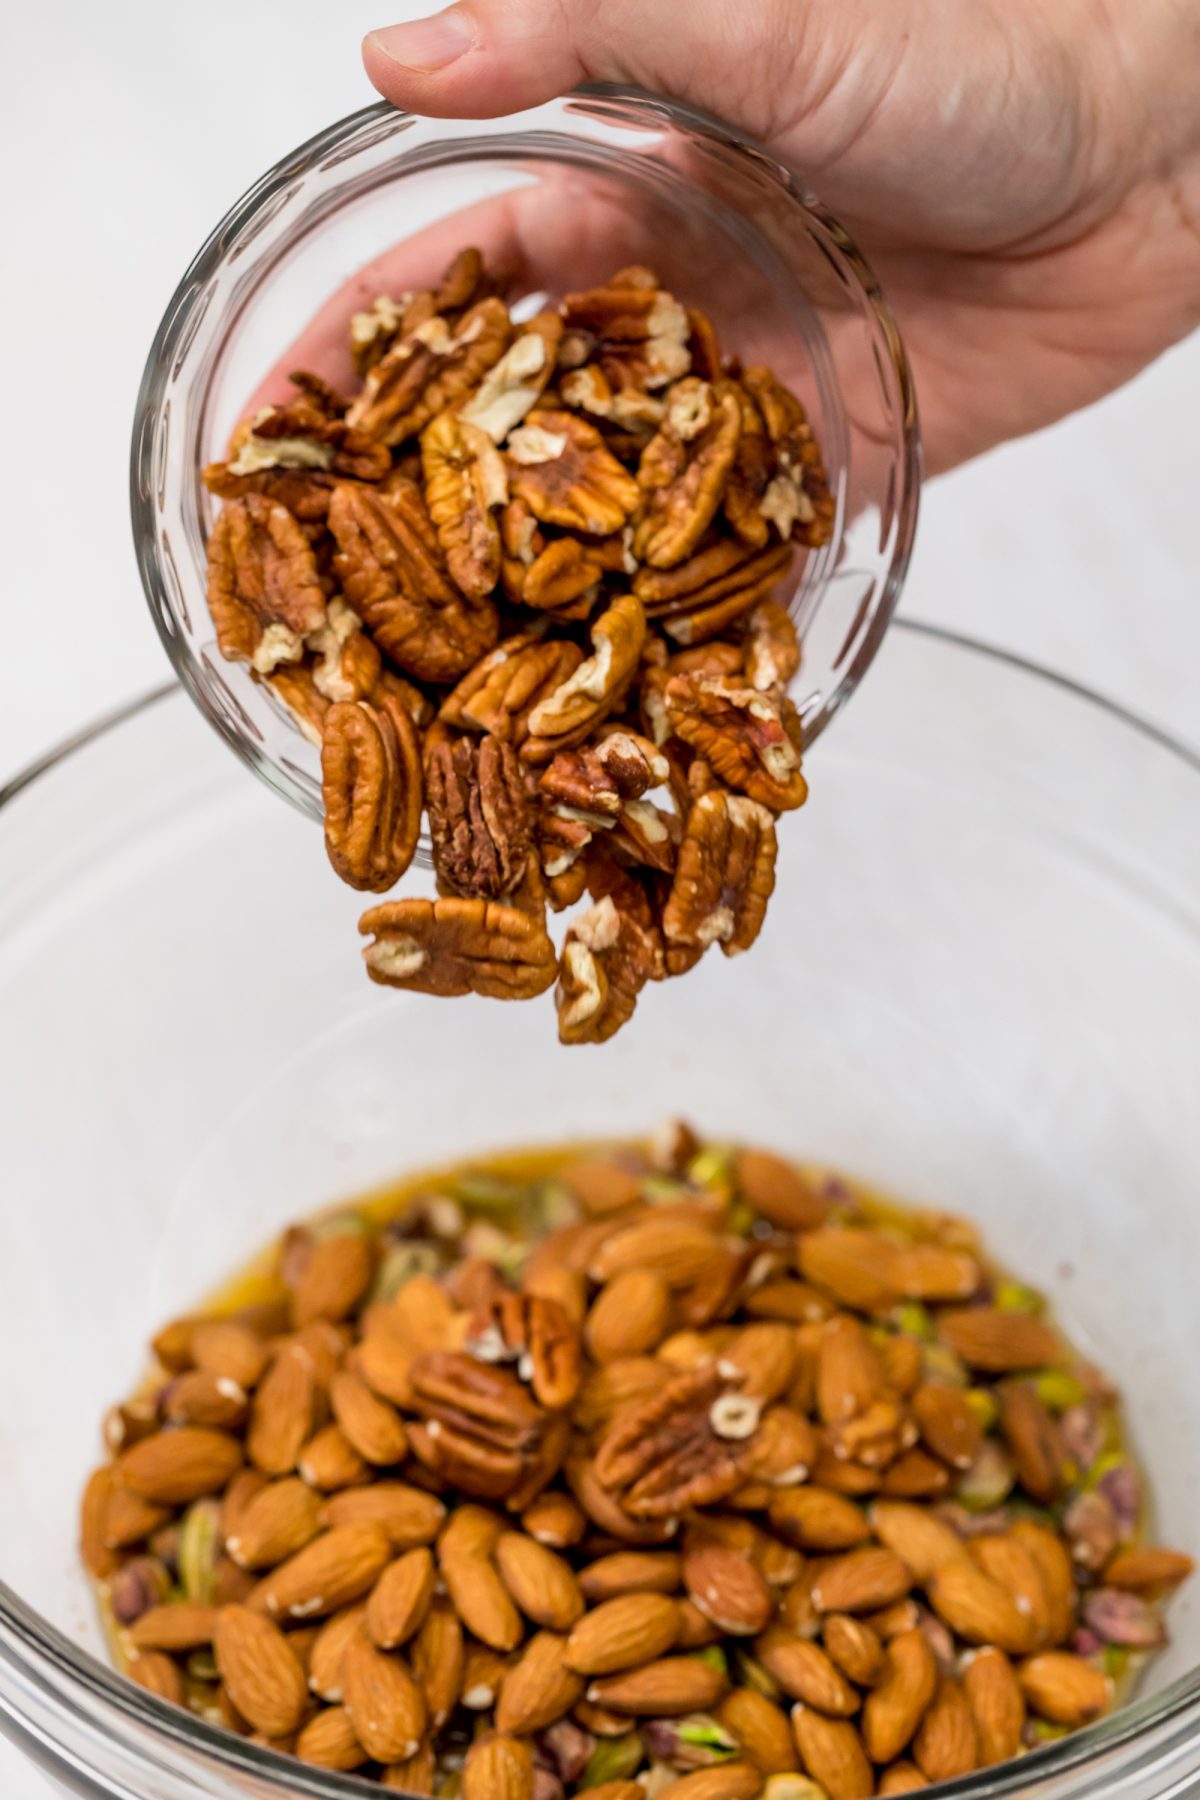 Adding pecans to the nut mix